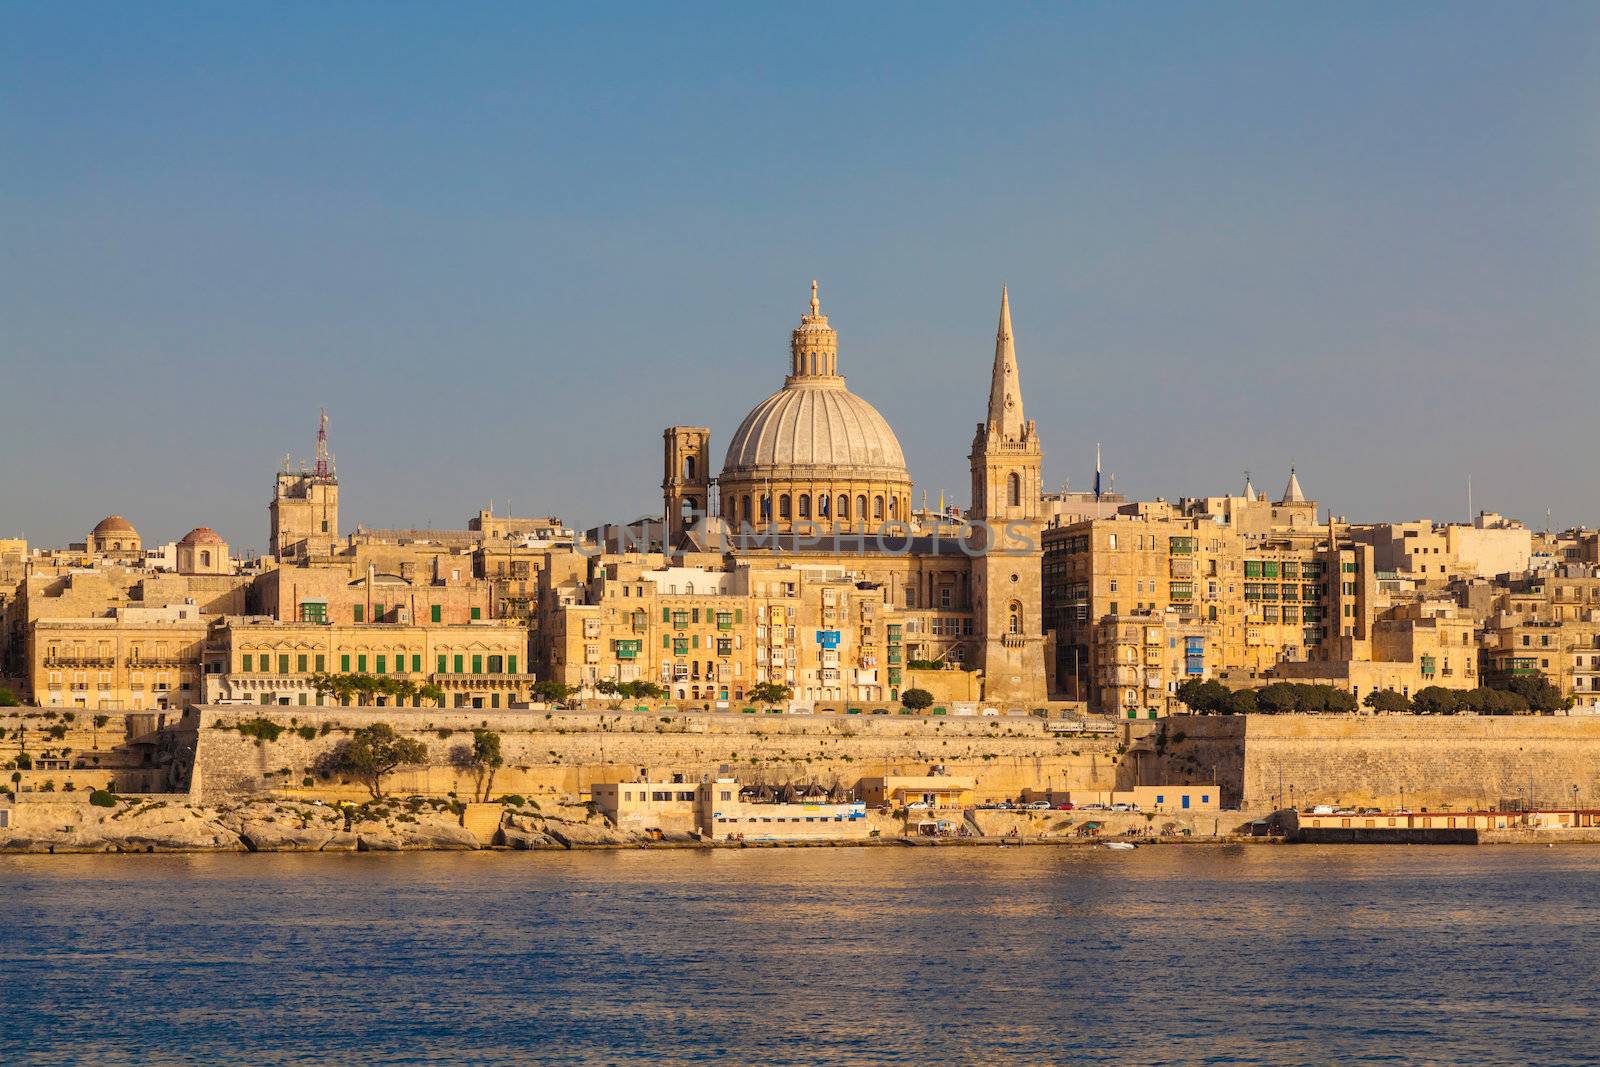 Skyline of the Maltese capital city Valletta in warm, late afternoon light